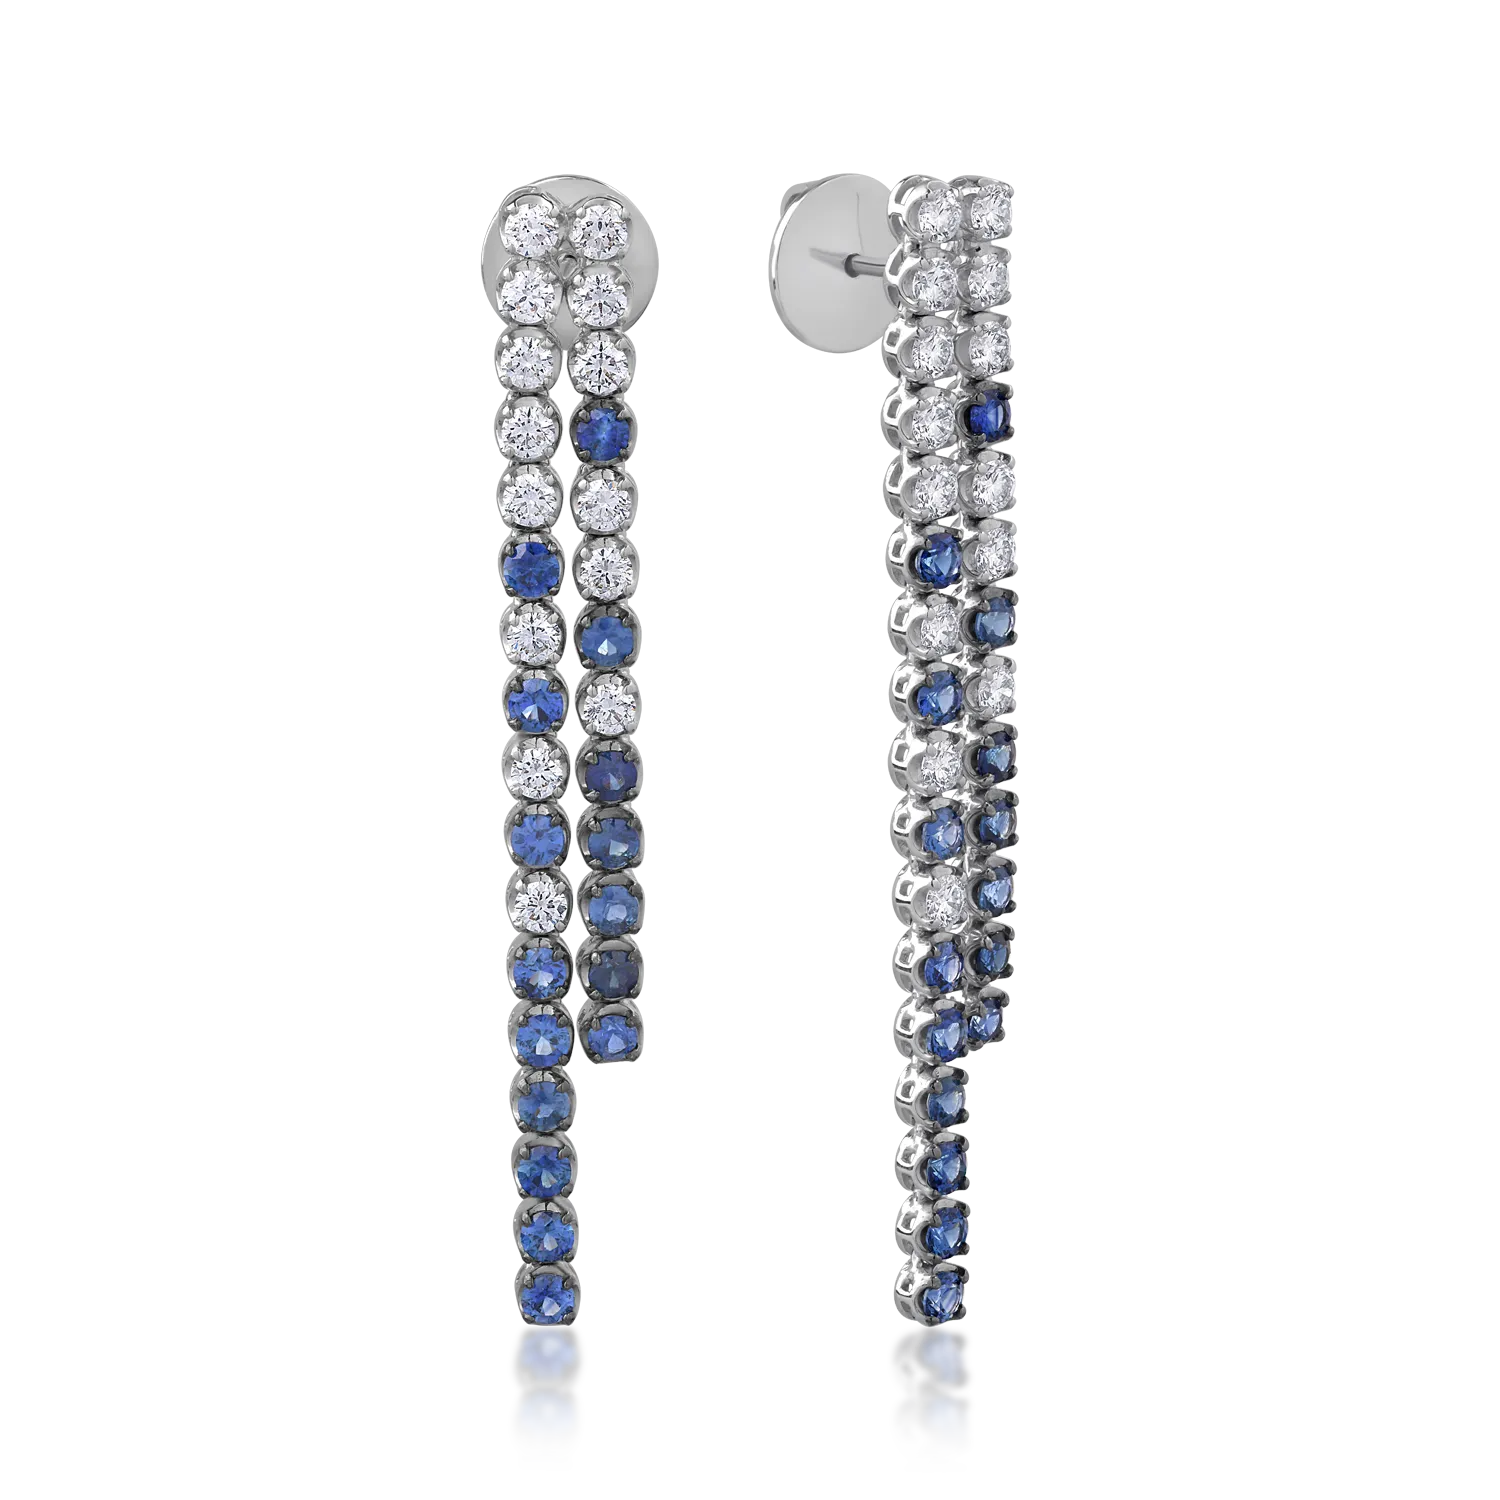 18K white gold earrings with 2.23ct sapphires and 1.4ct diamonds